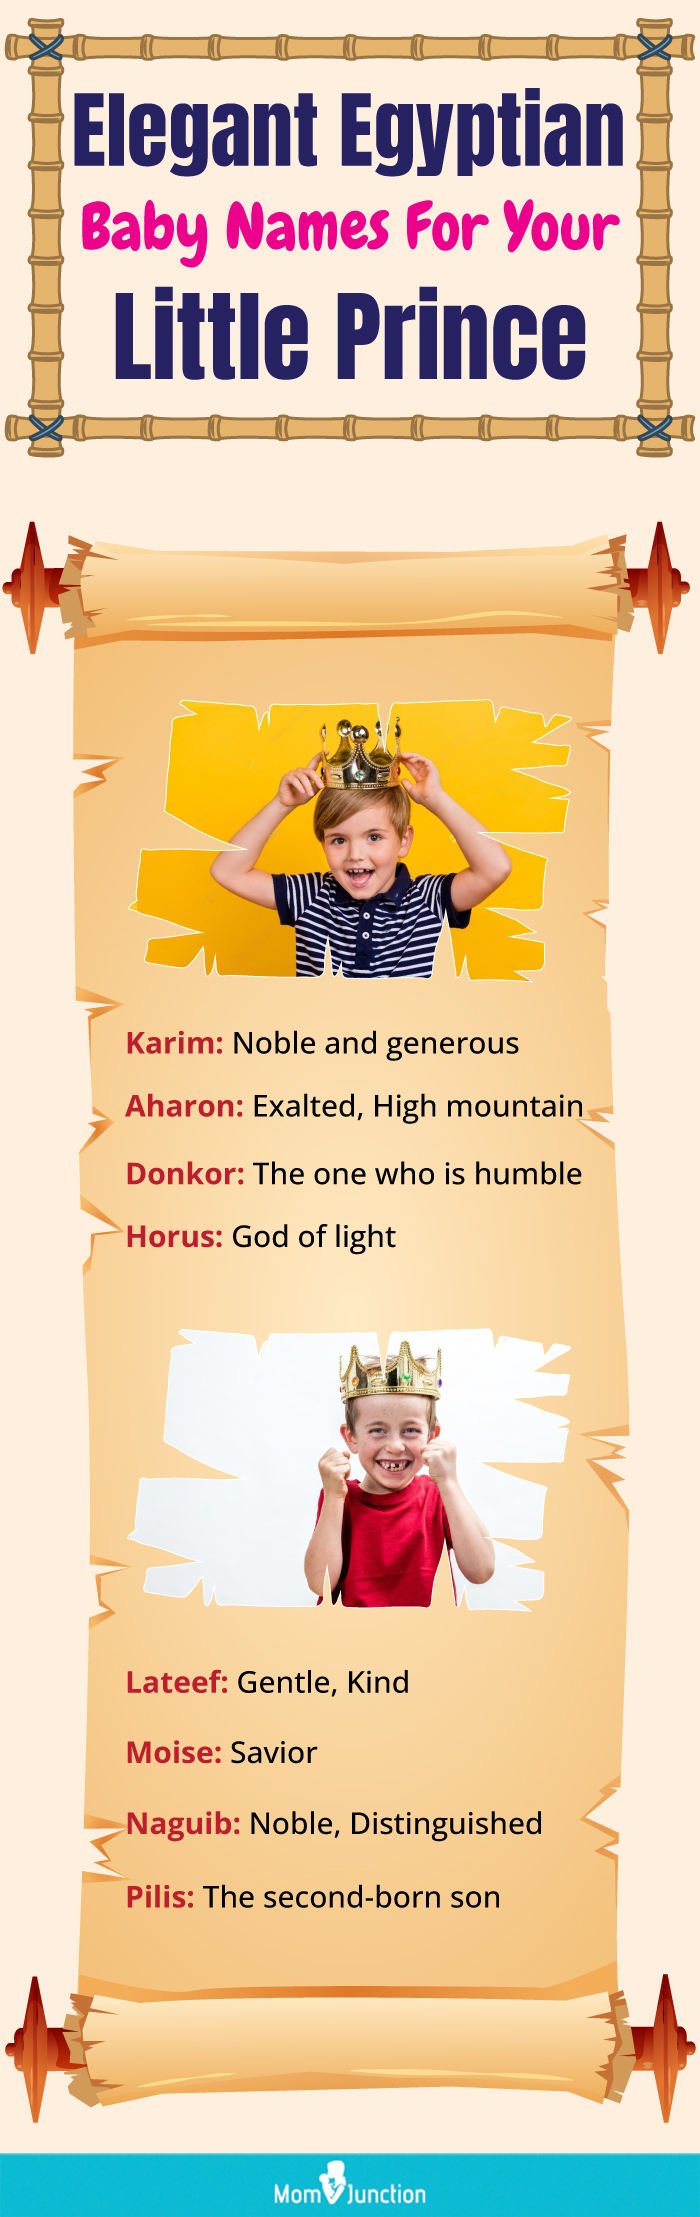 elegant egyptian baby names for your little prince (infographic)